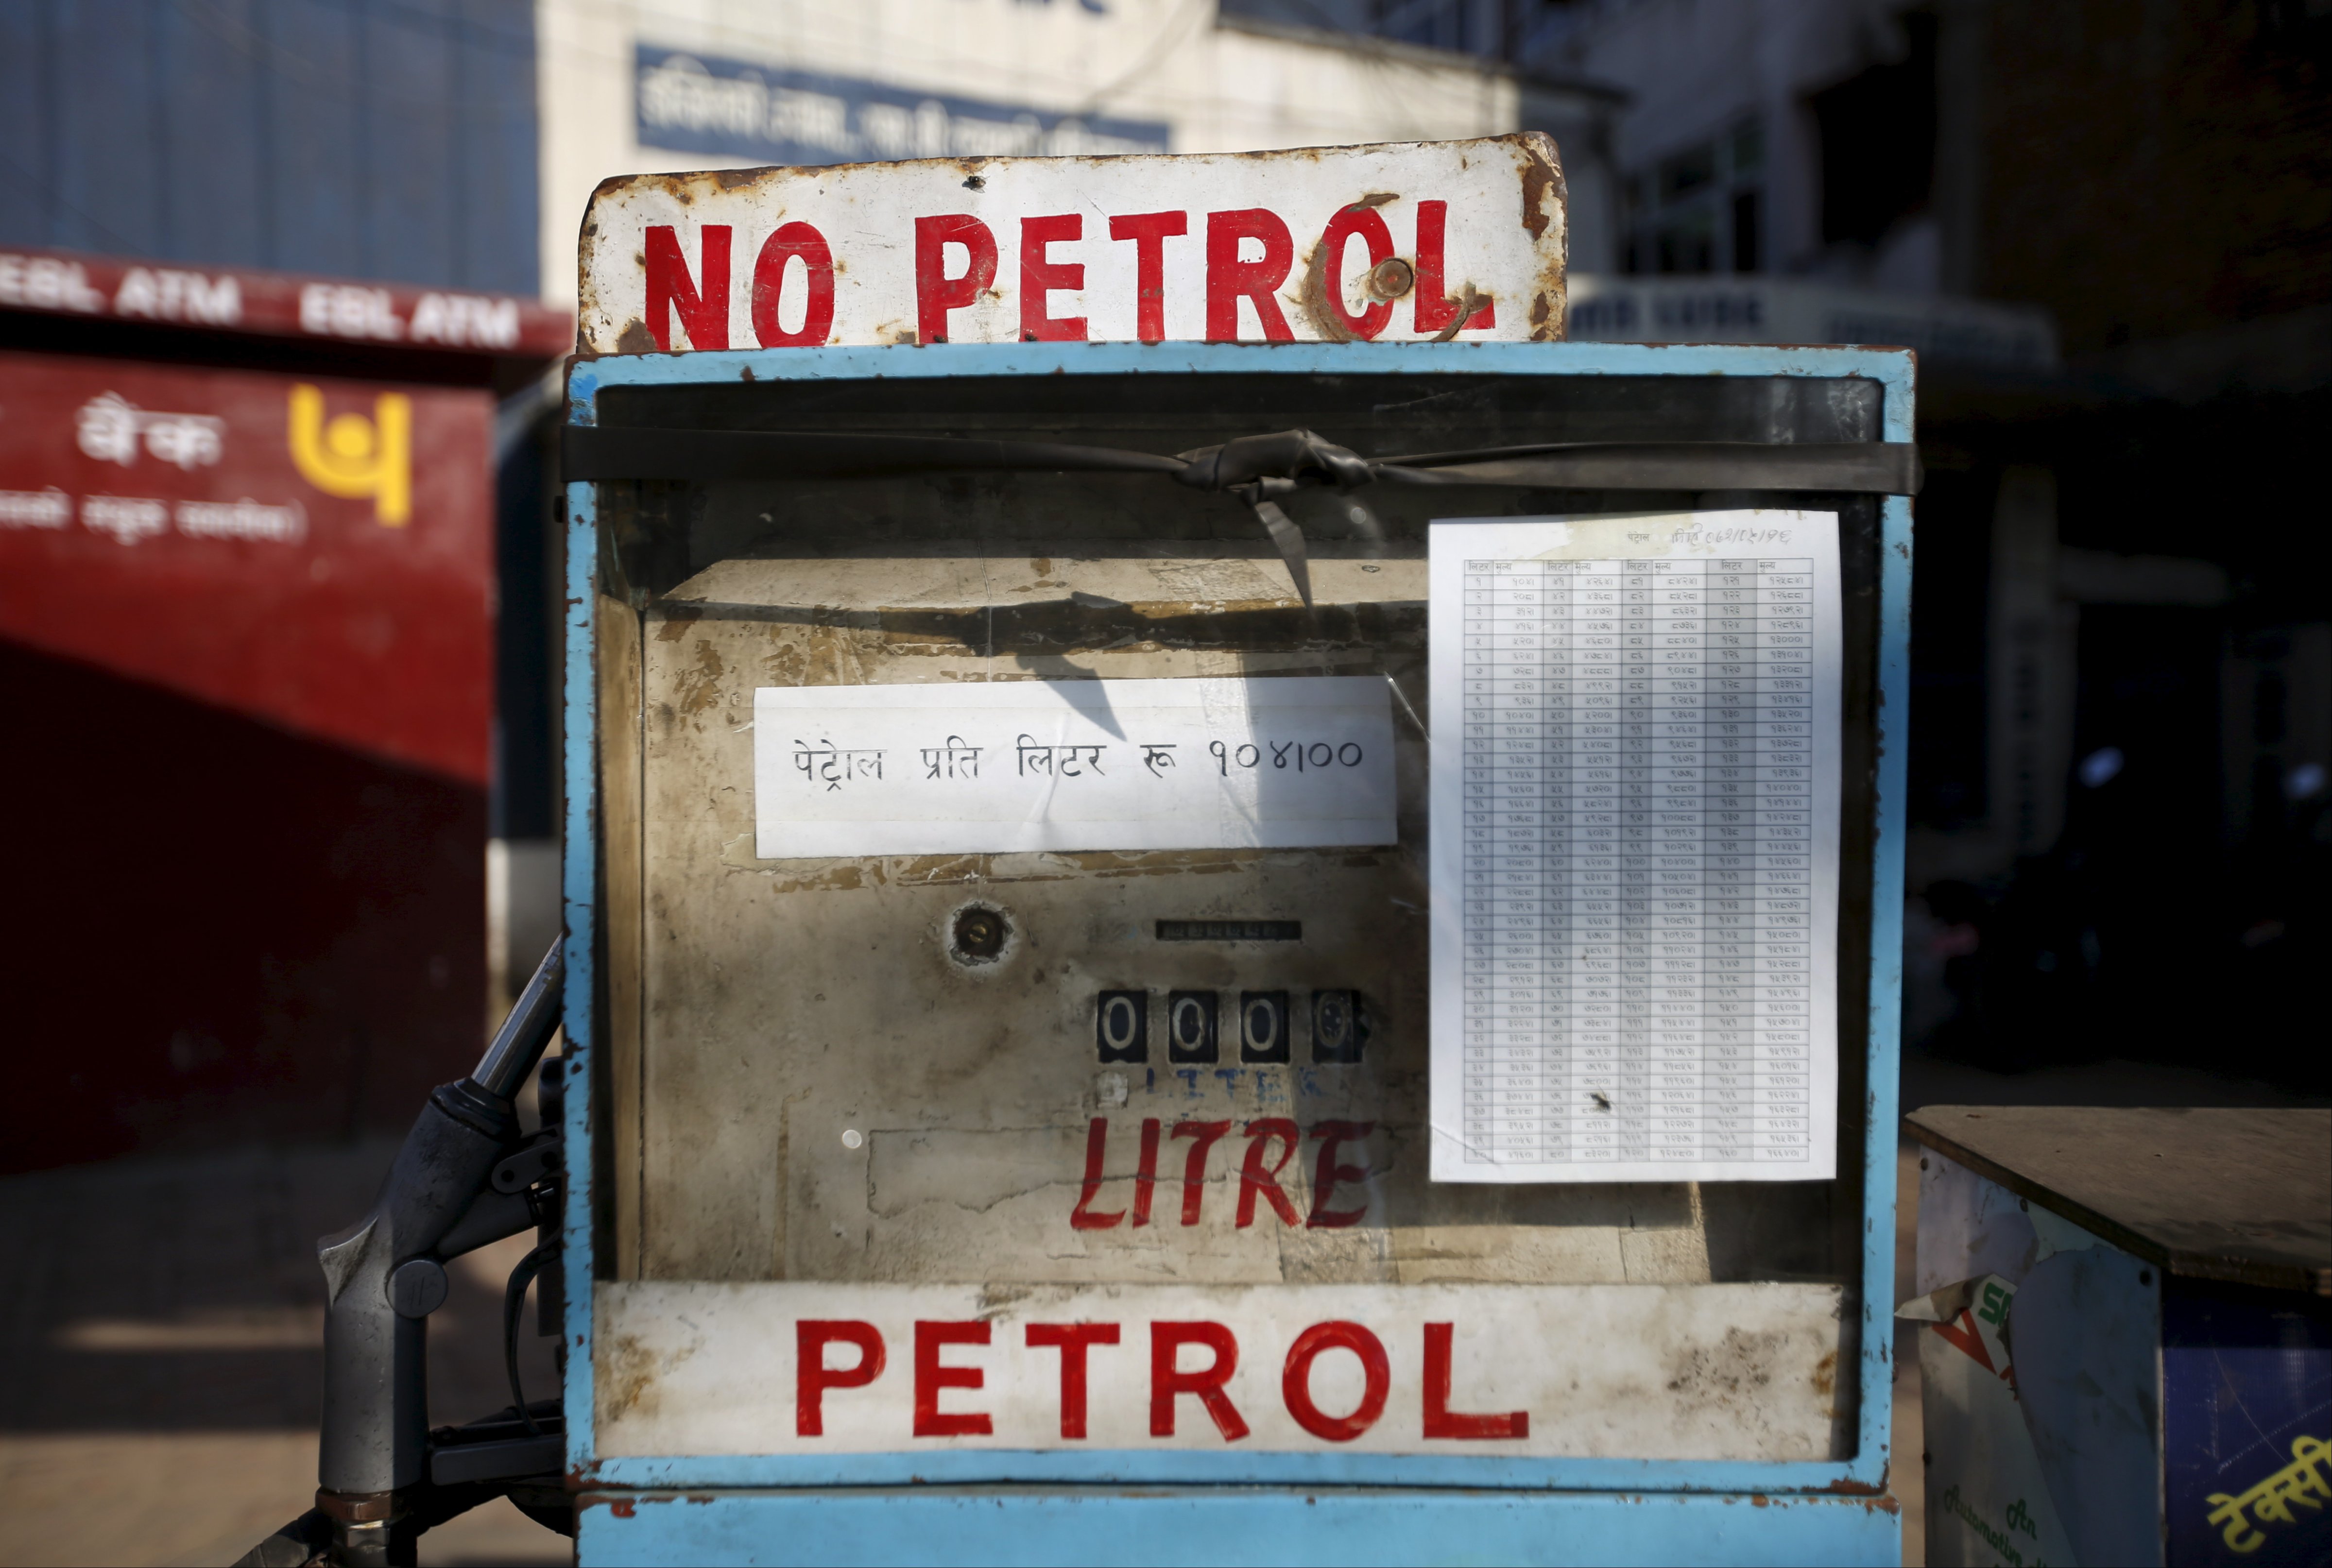 A sign reading "No Petrol" is pictured at a petrol pump in Kathmandu on Oct. 1, 2015, as Nepal's fuel crisis continues (Navesh Chitrakar—Reuters)